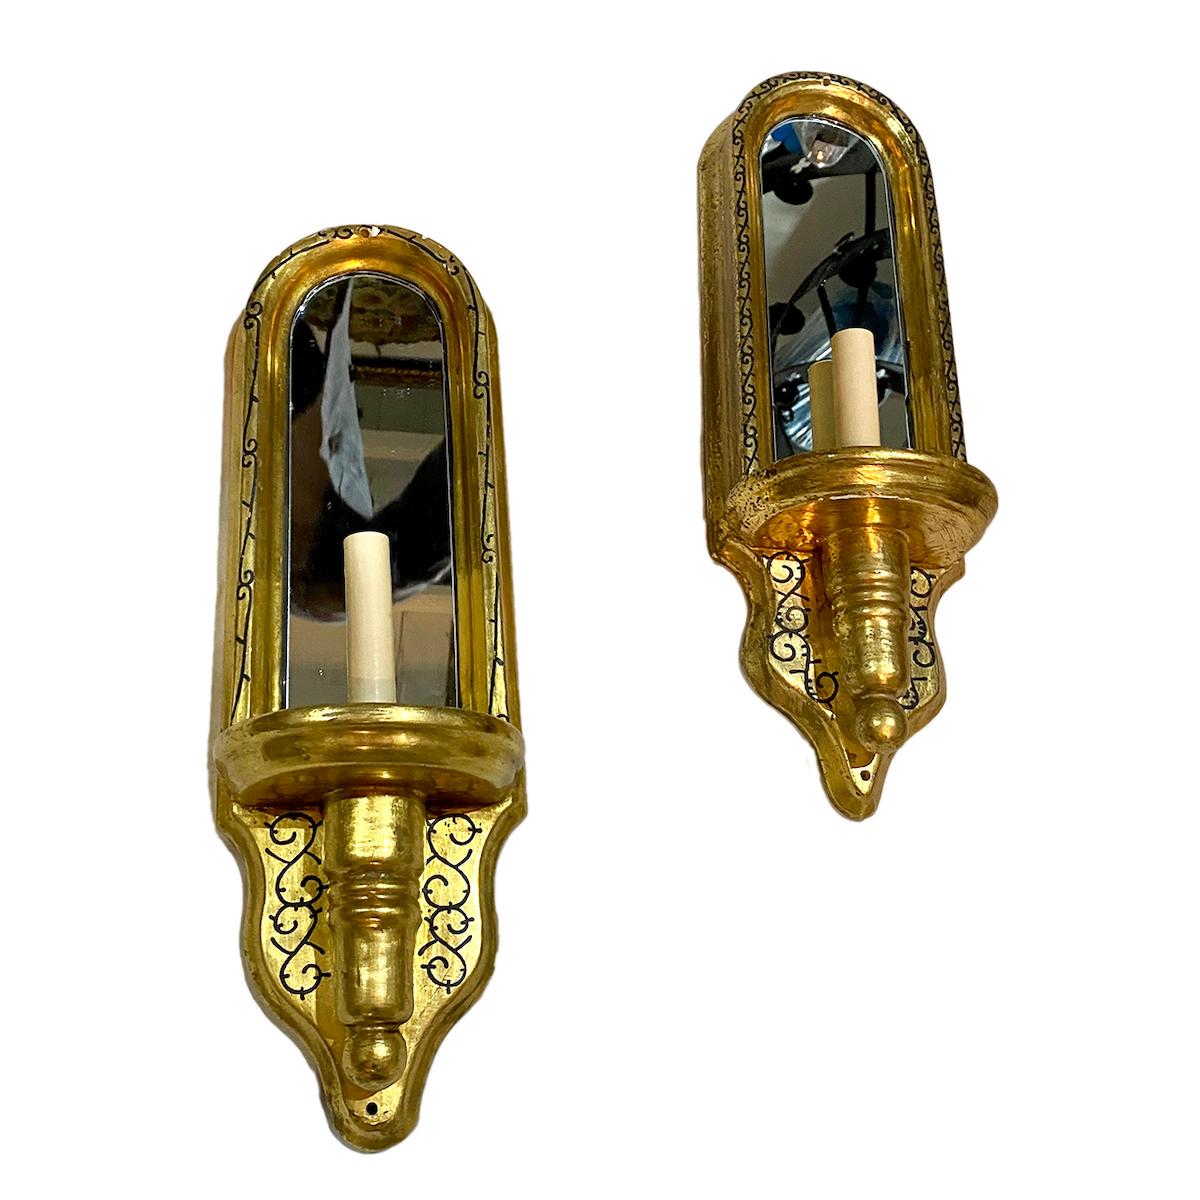 Pair of 1960’s Italian gilt wood sconces with mirror backplate.

Measurements:
Height: 19?
Width: 6?
Depth: 5?.